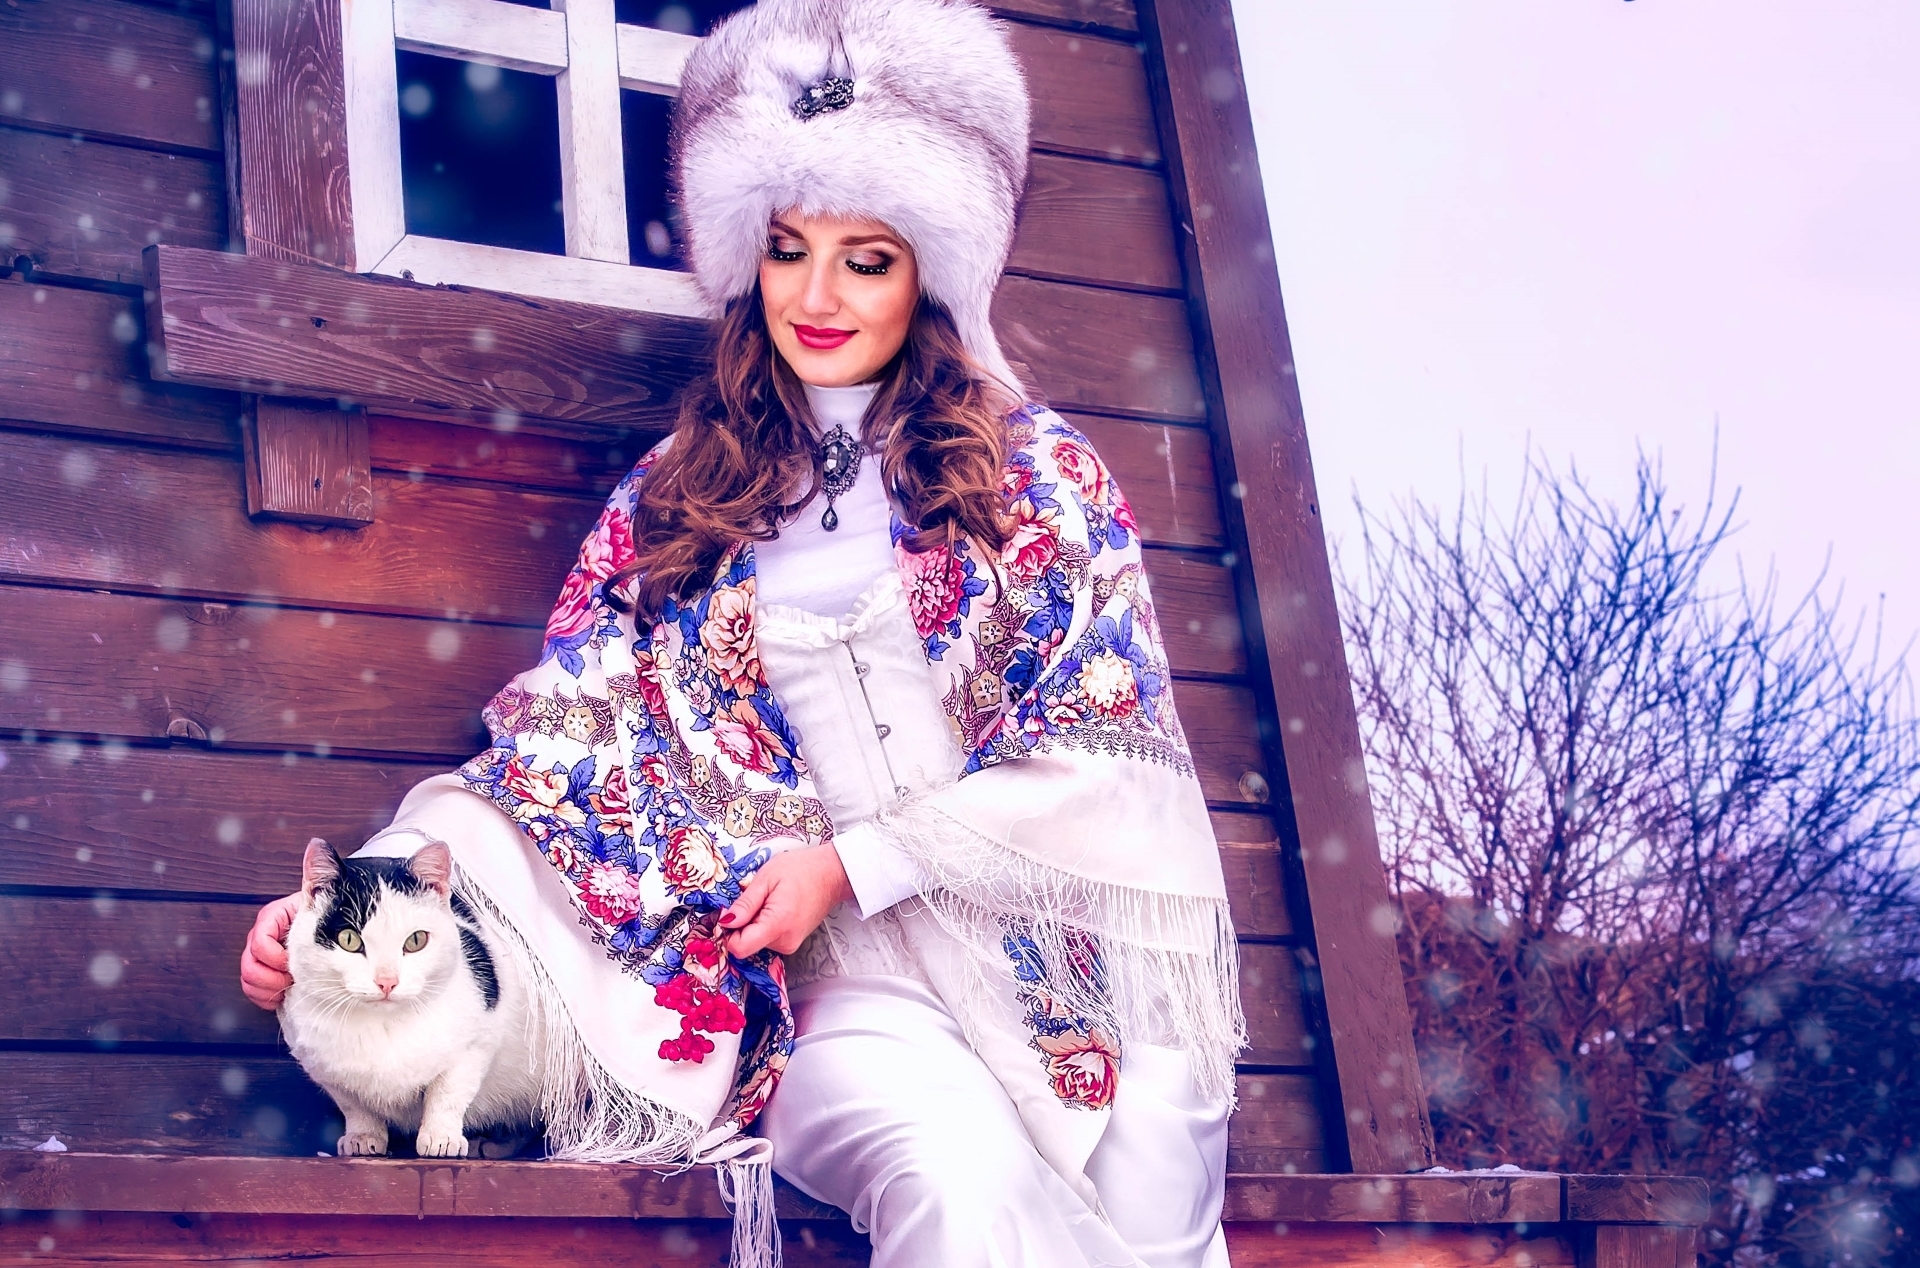 Image: Girl, makeup, fur hat, scarf, cat, winter, home, style